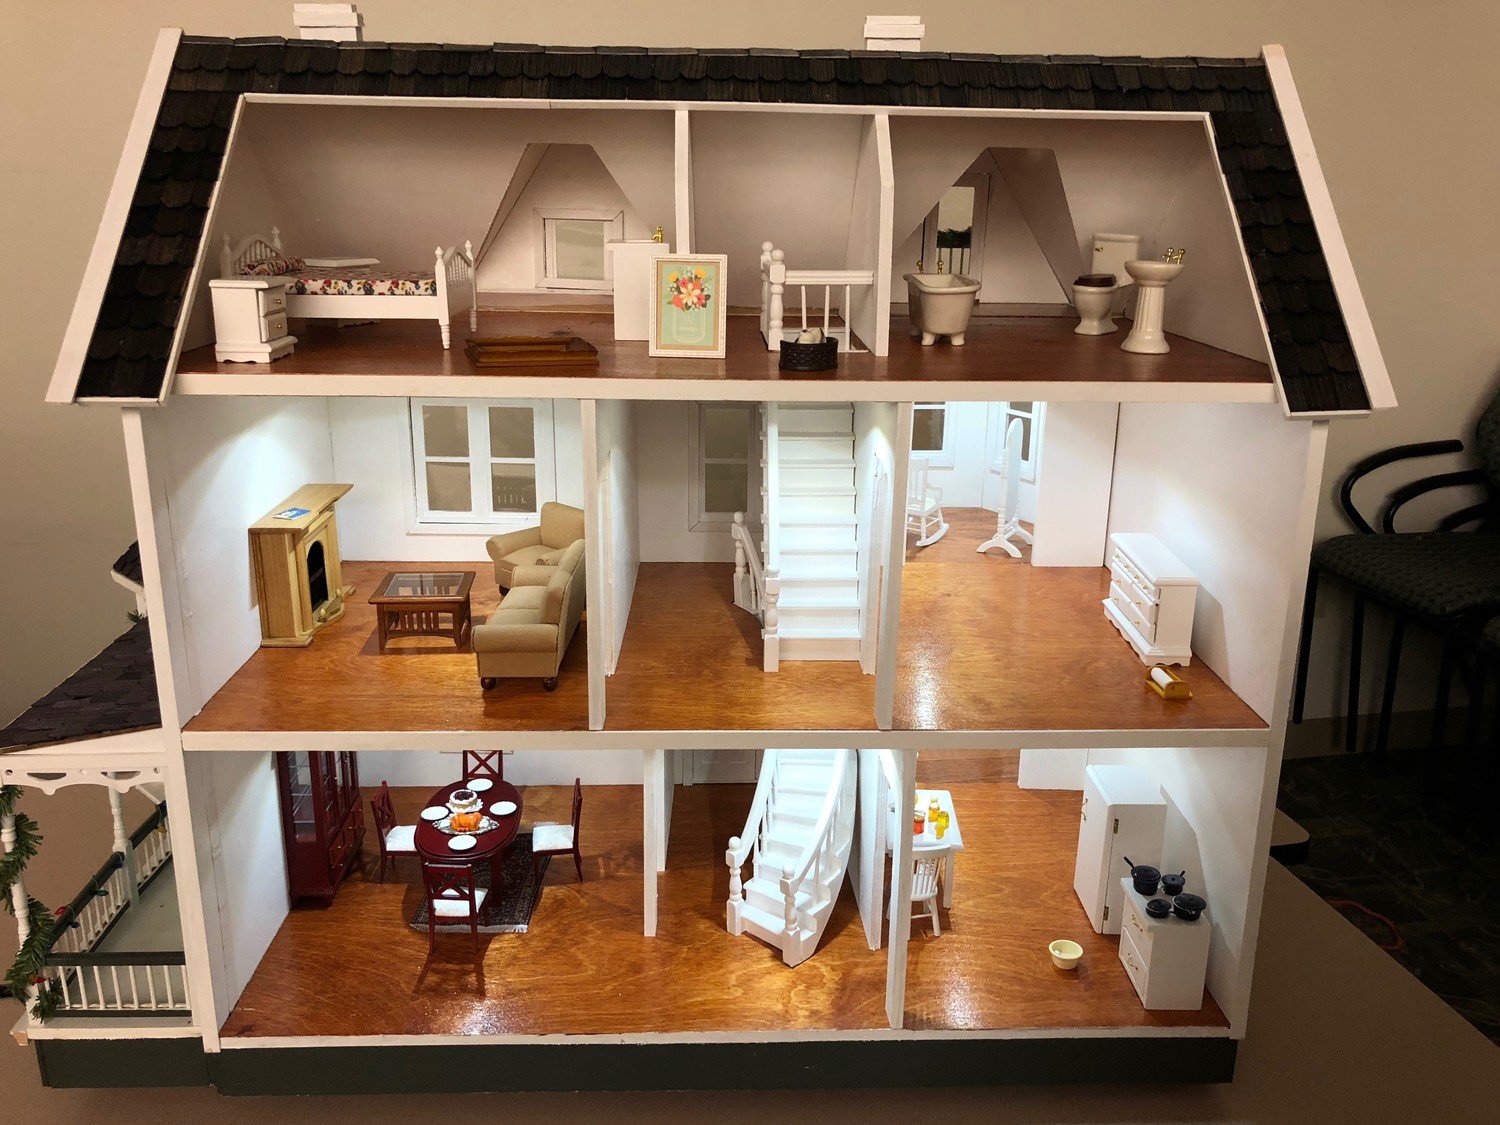 The interiors of Brendan Hoffman’s dollhouses are elaborately furnished and lighted.